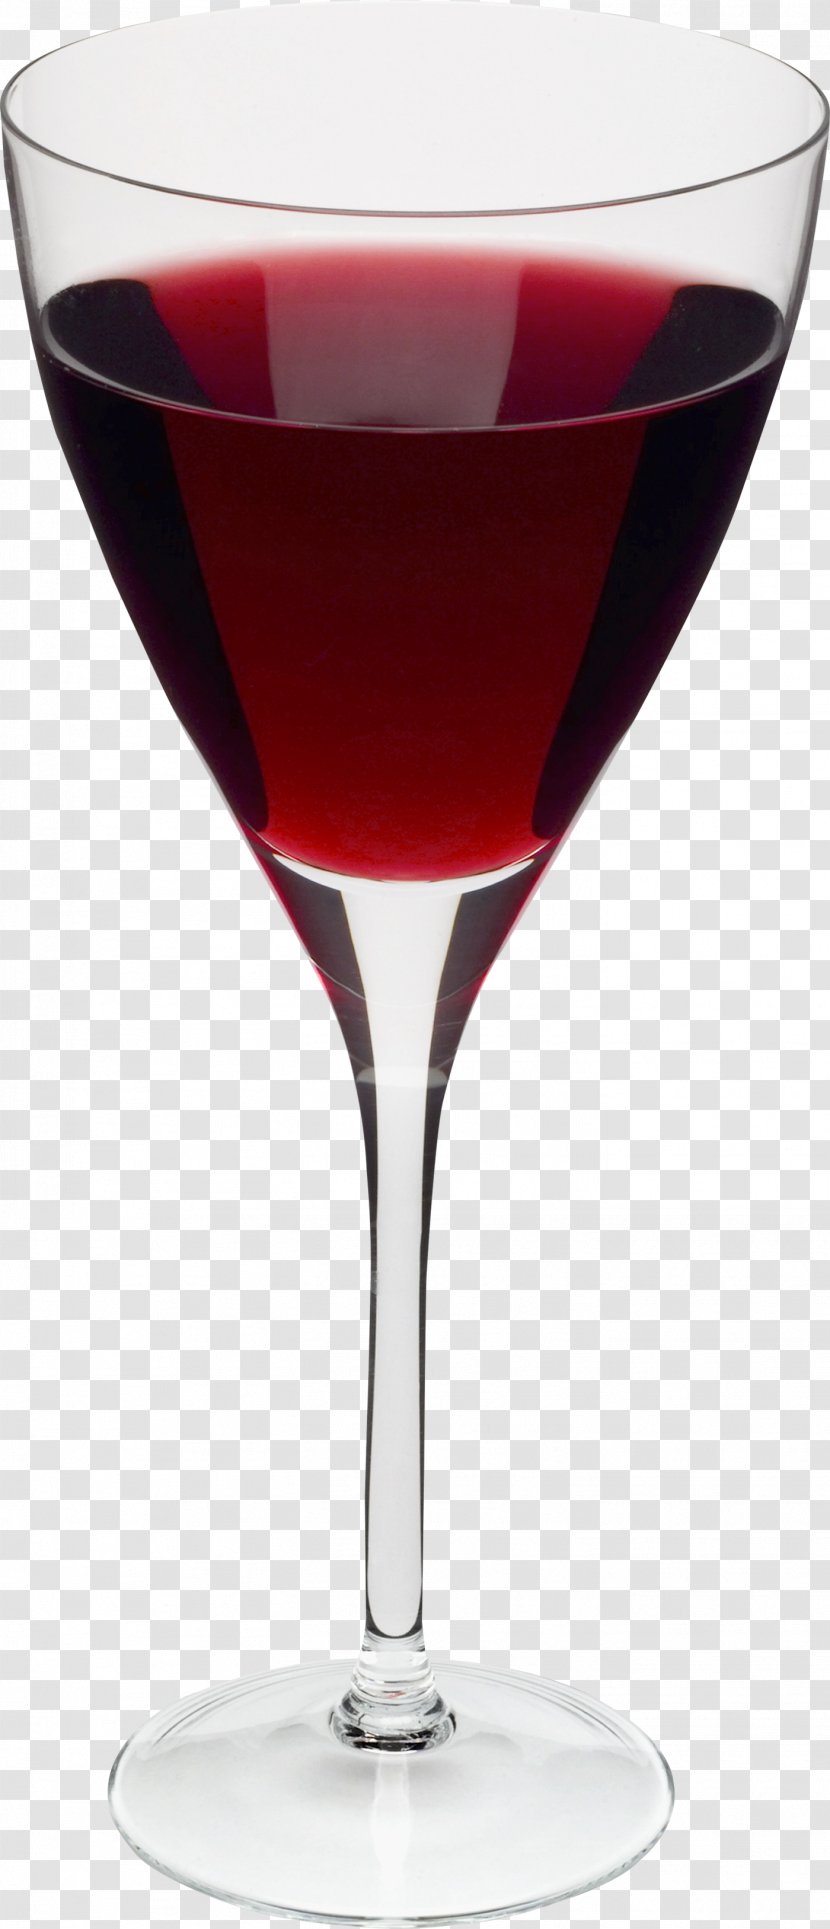 Wine Cocktail Kir Rob Roy Manhattan Blood And Sand - Drinkware - Glass Image Transparent PNG